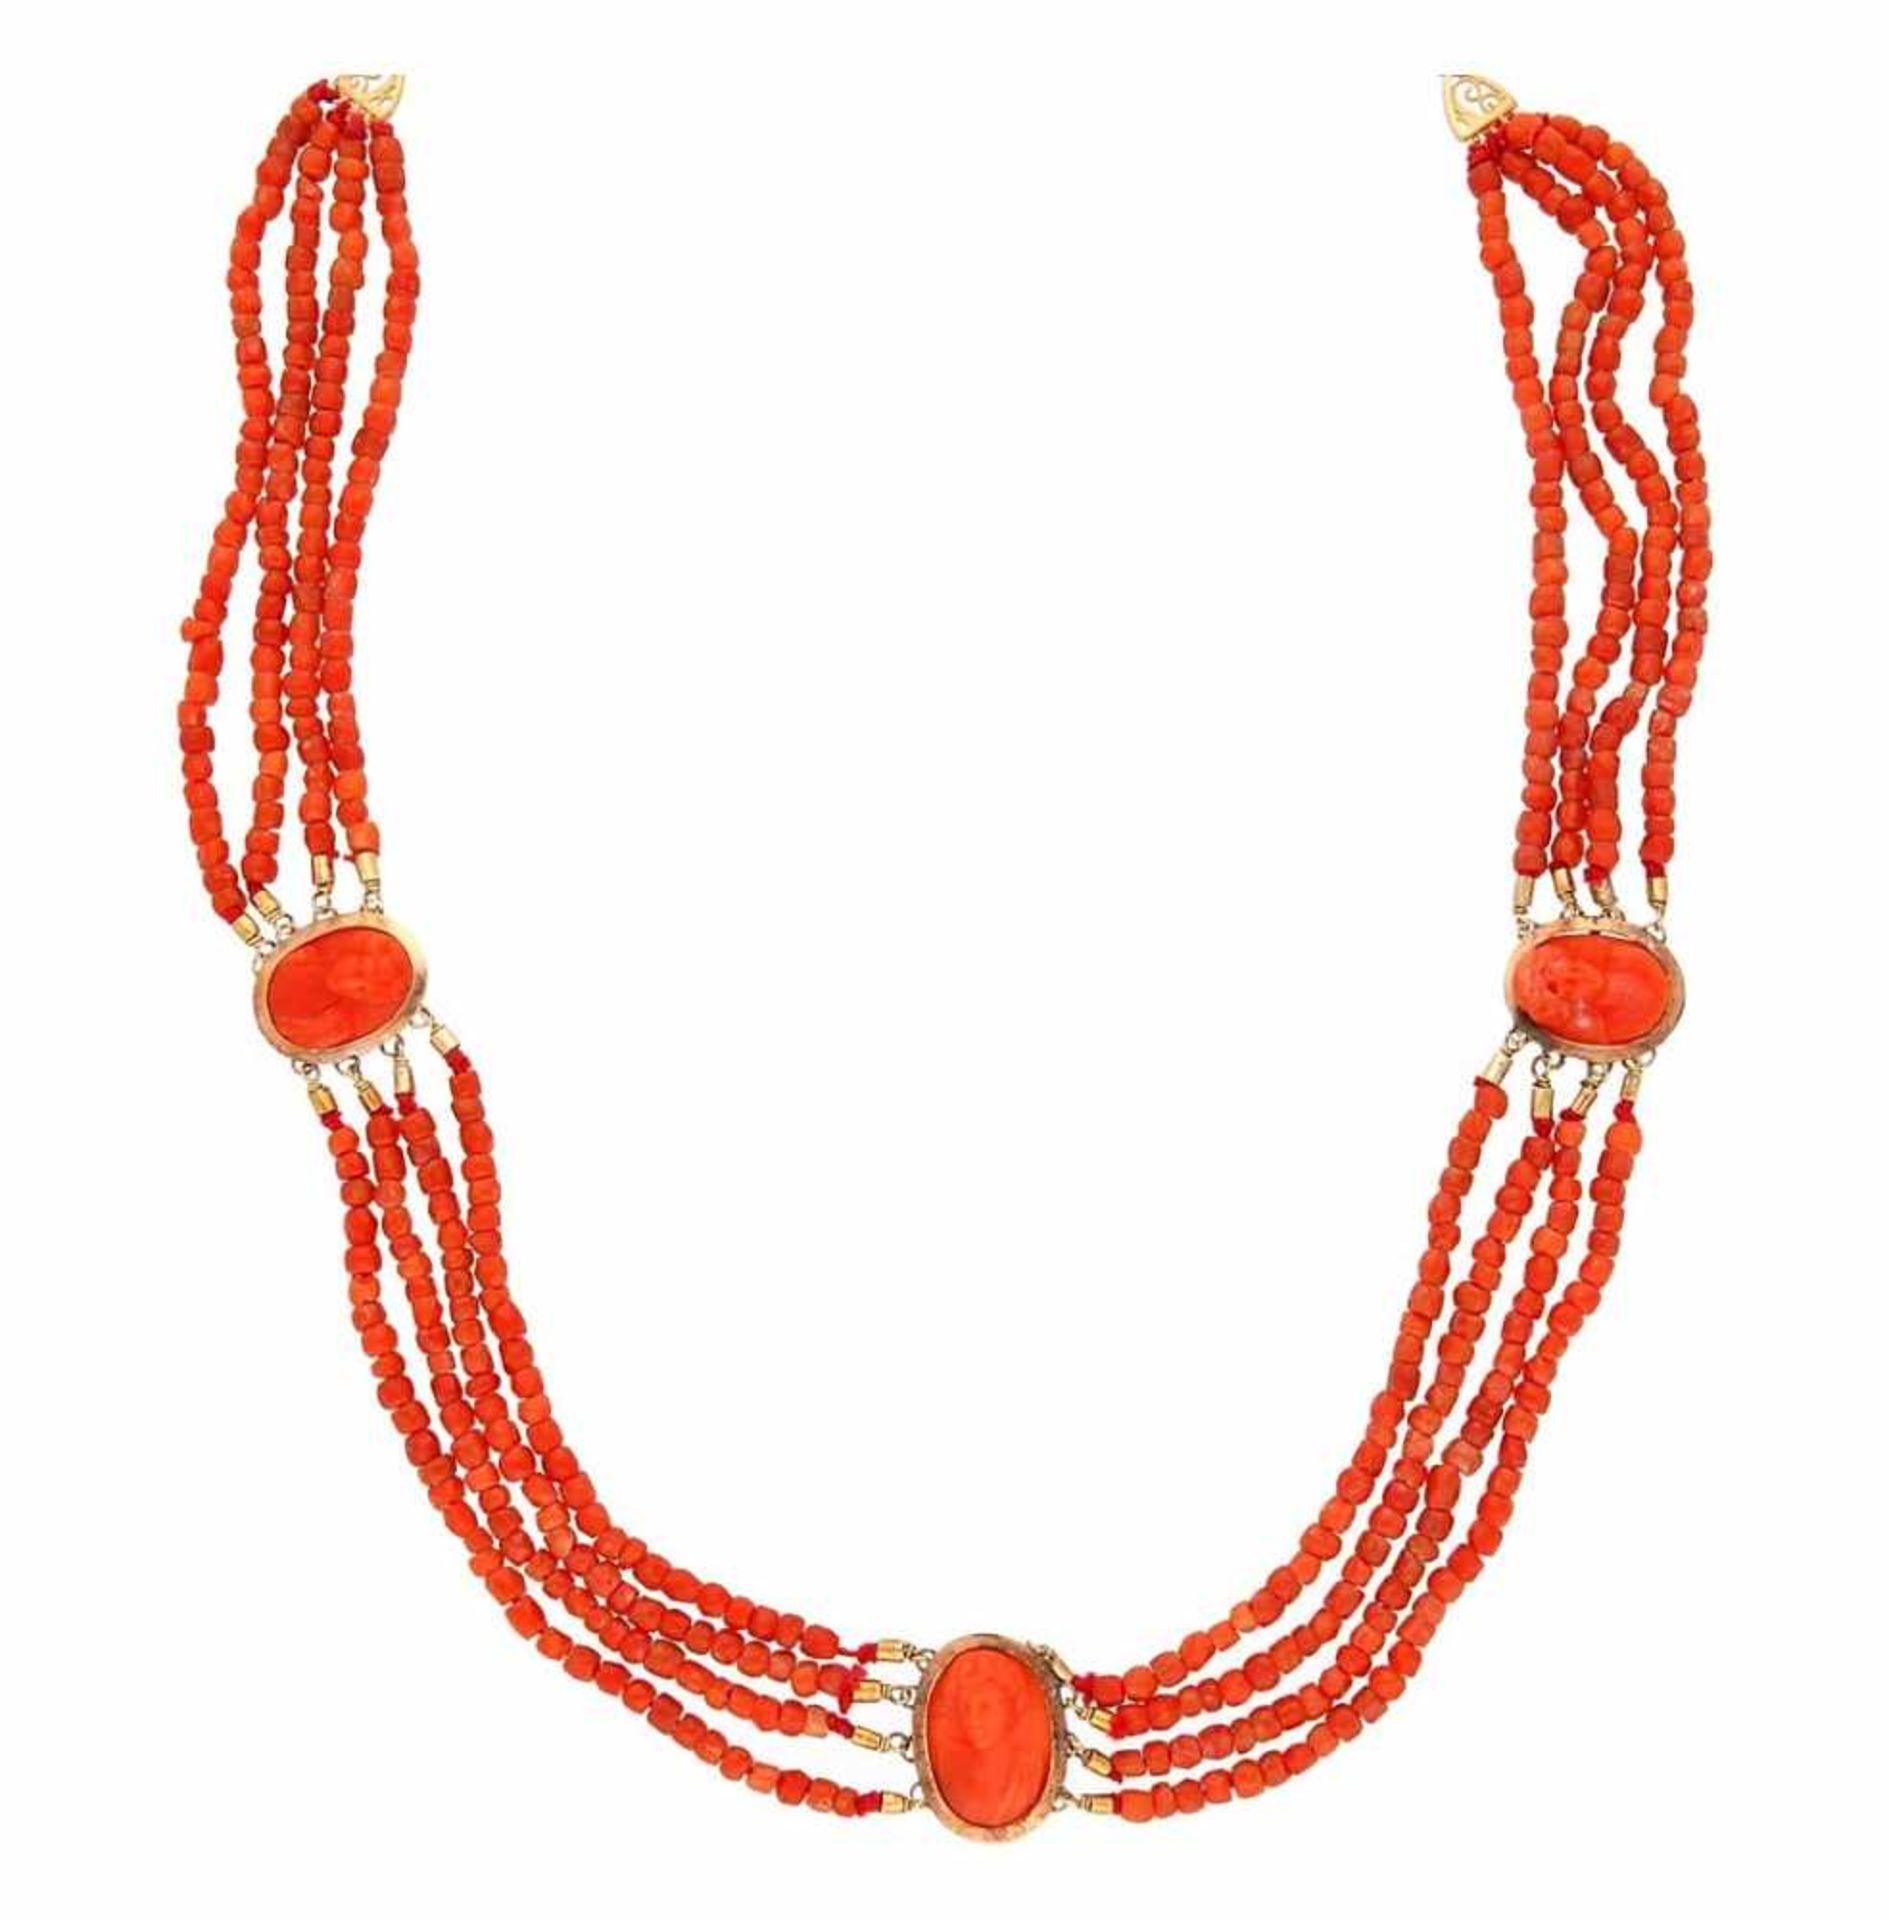 Coral choker, 19th Century.Gold, faceted coral beads and cameos in carved coral with the